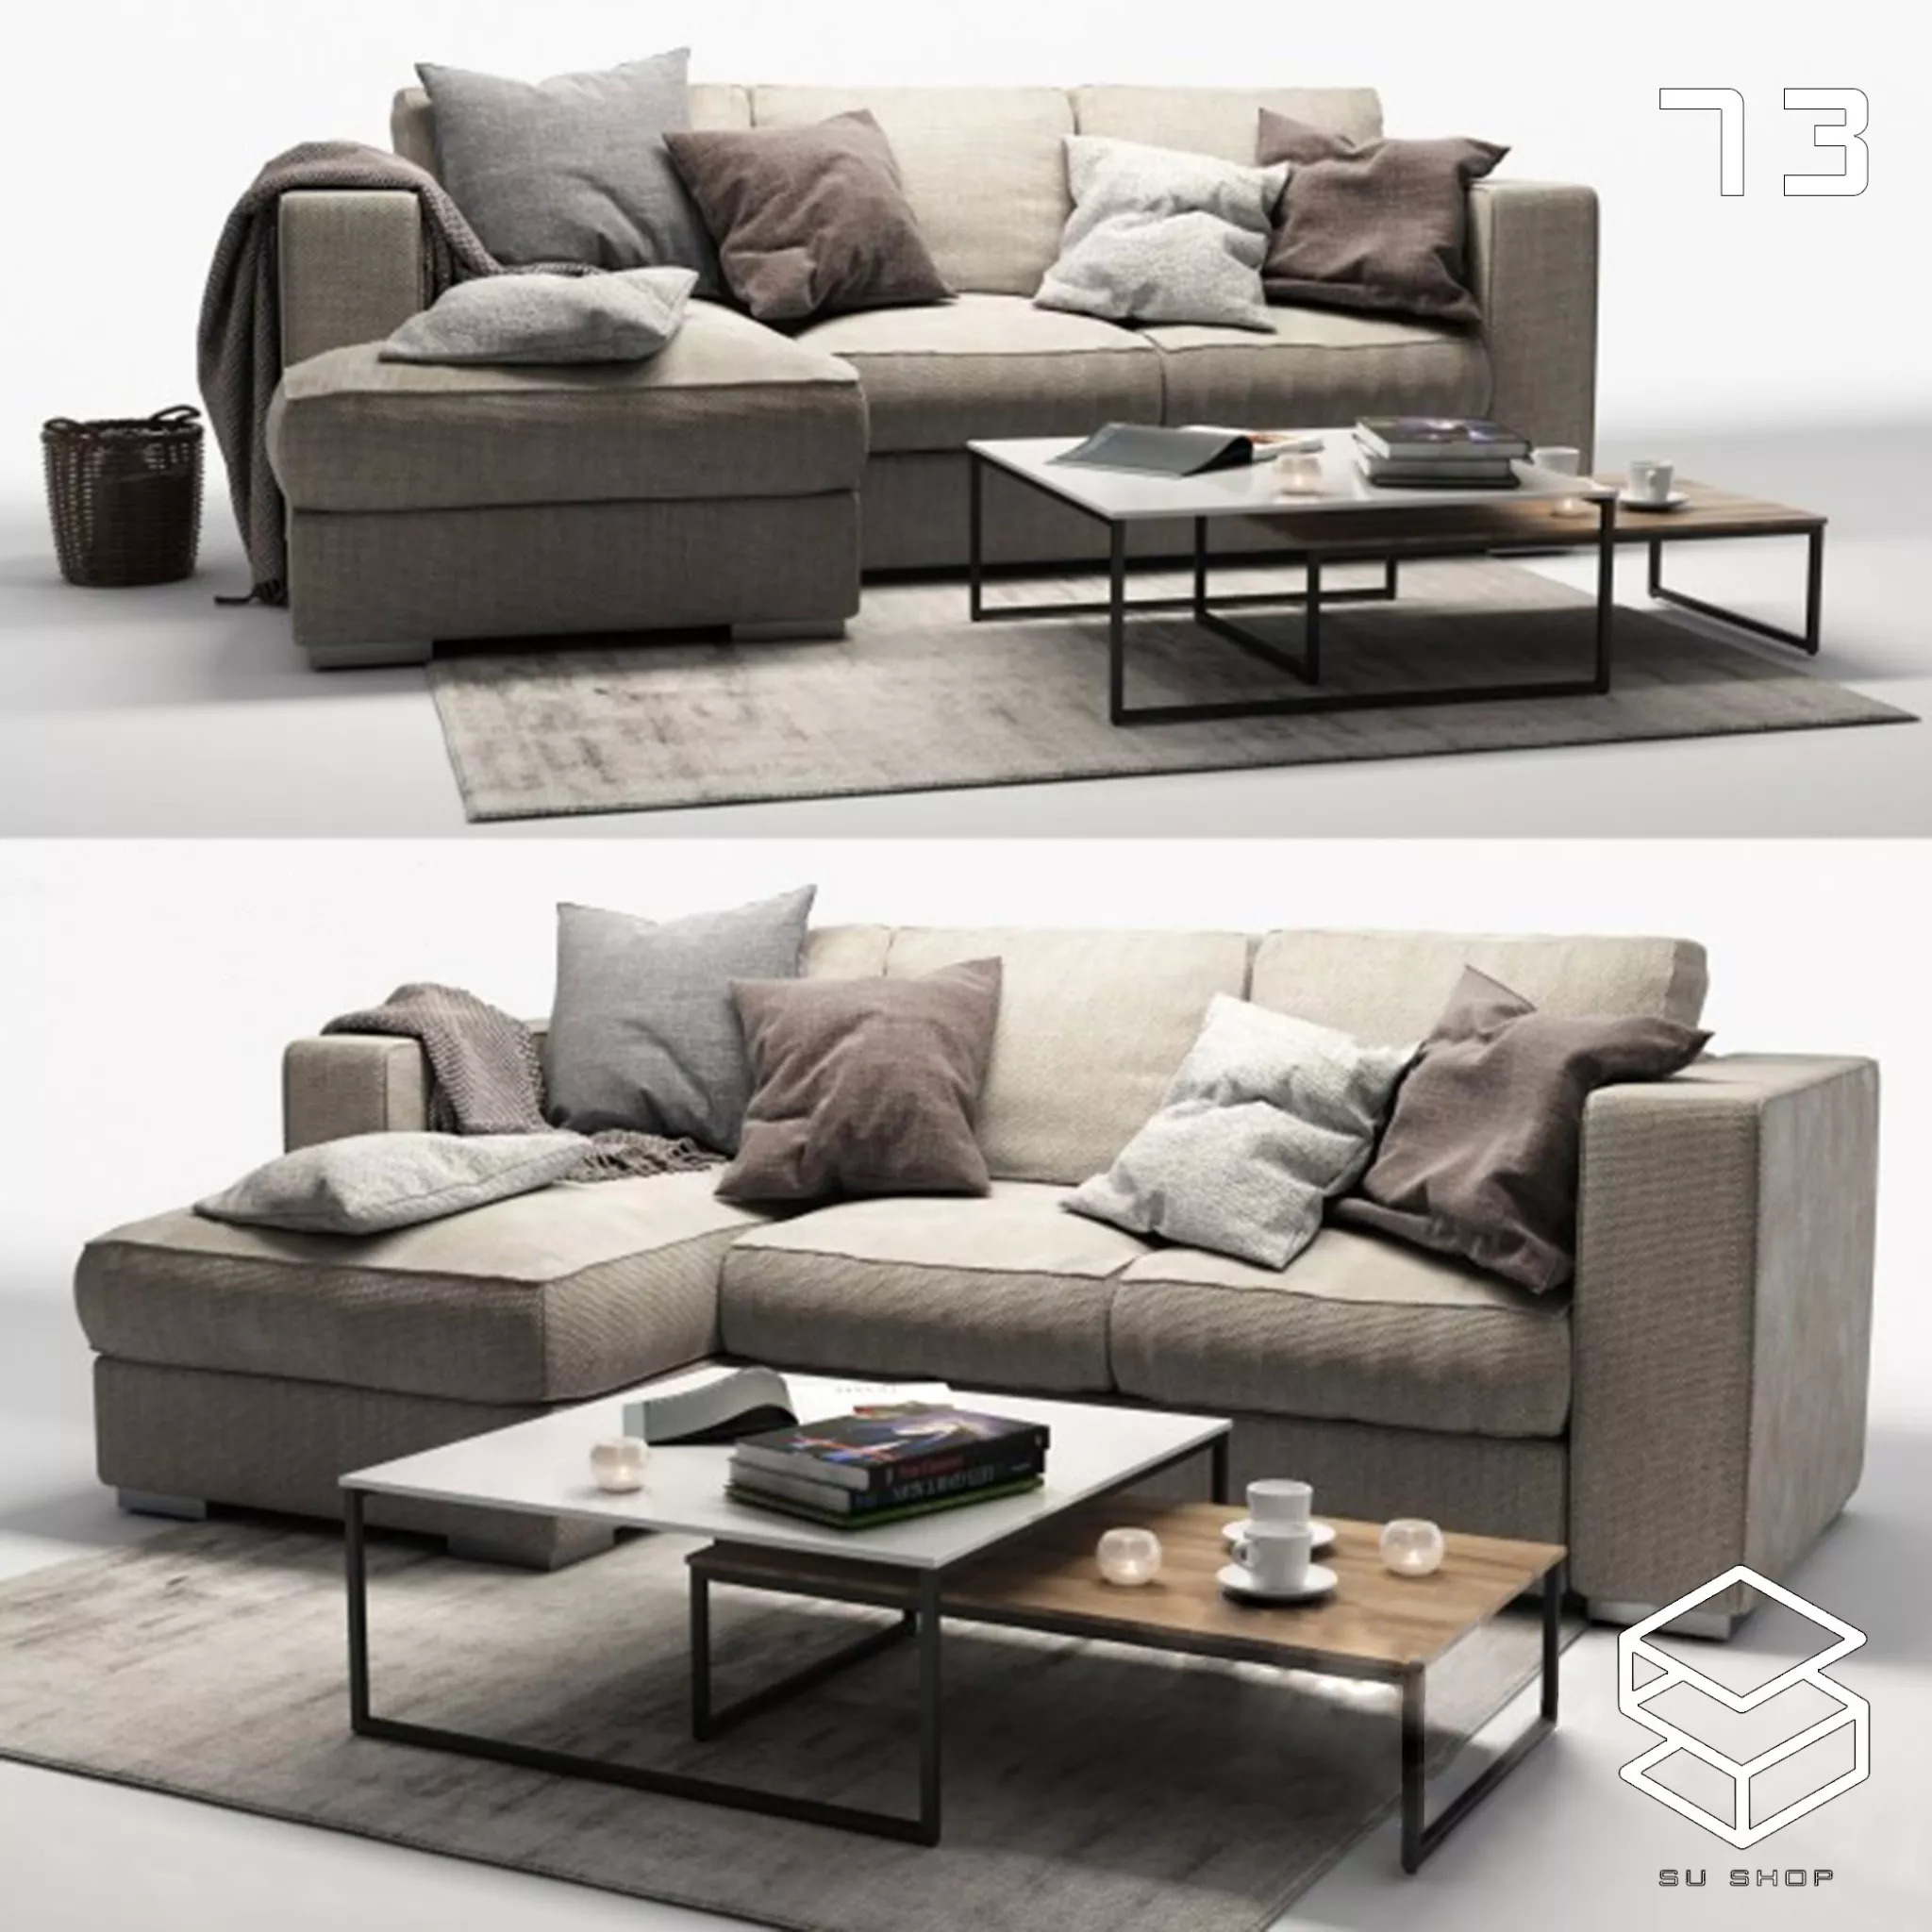 MODERN SOFA - SKETCHUP 3D MODEL - VRAY OR ENSCAPE - ID13700